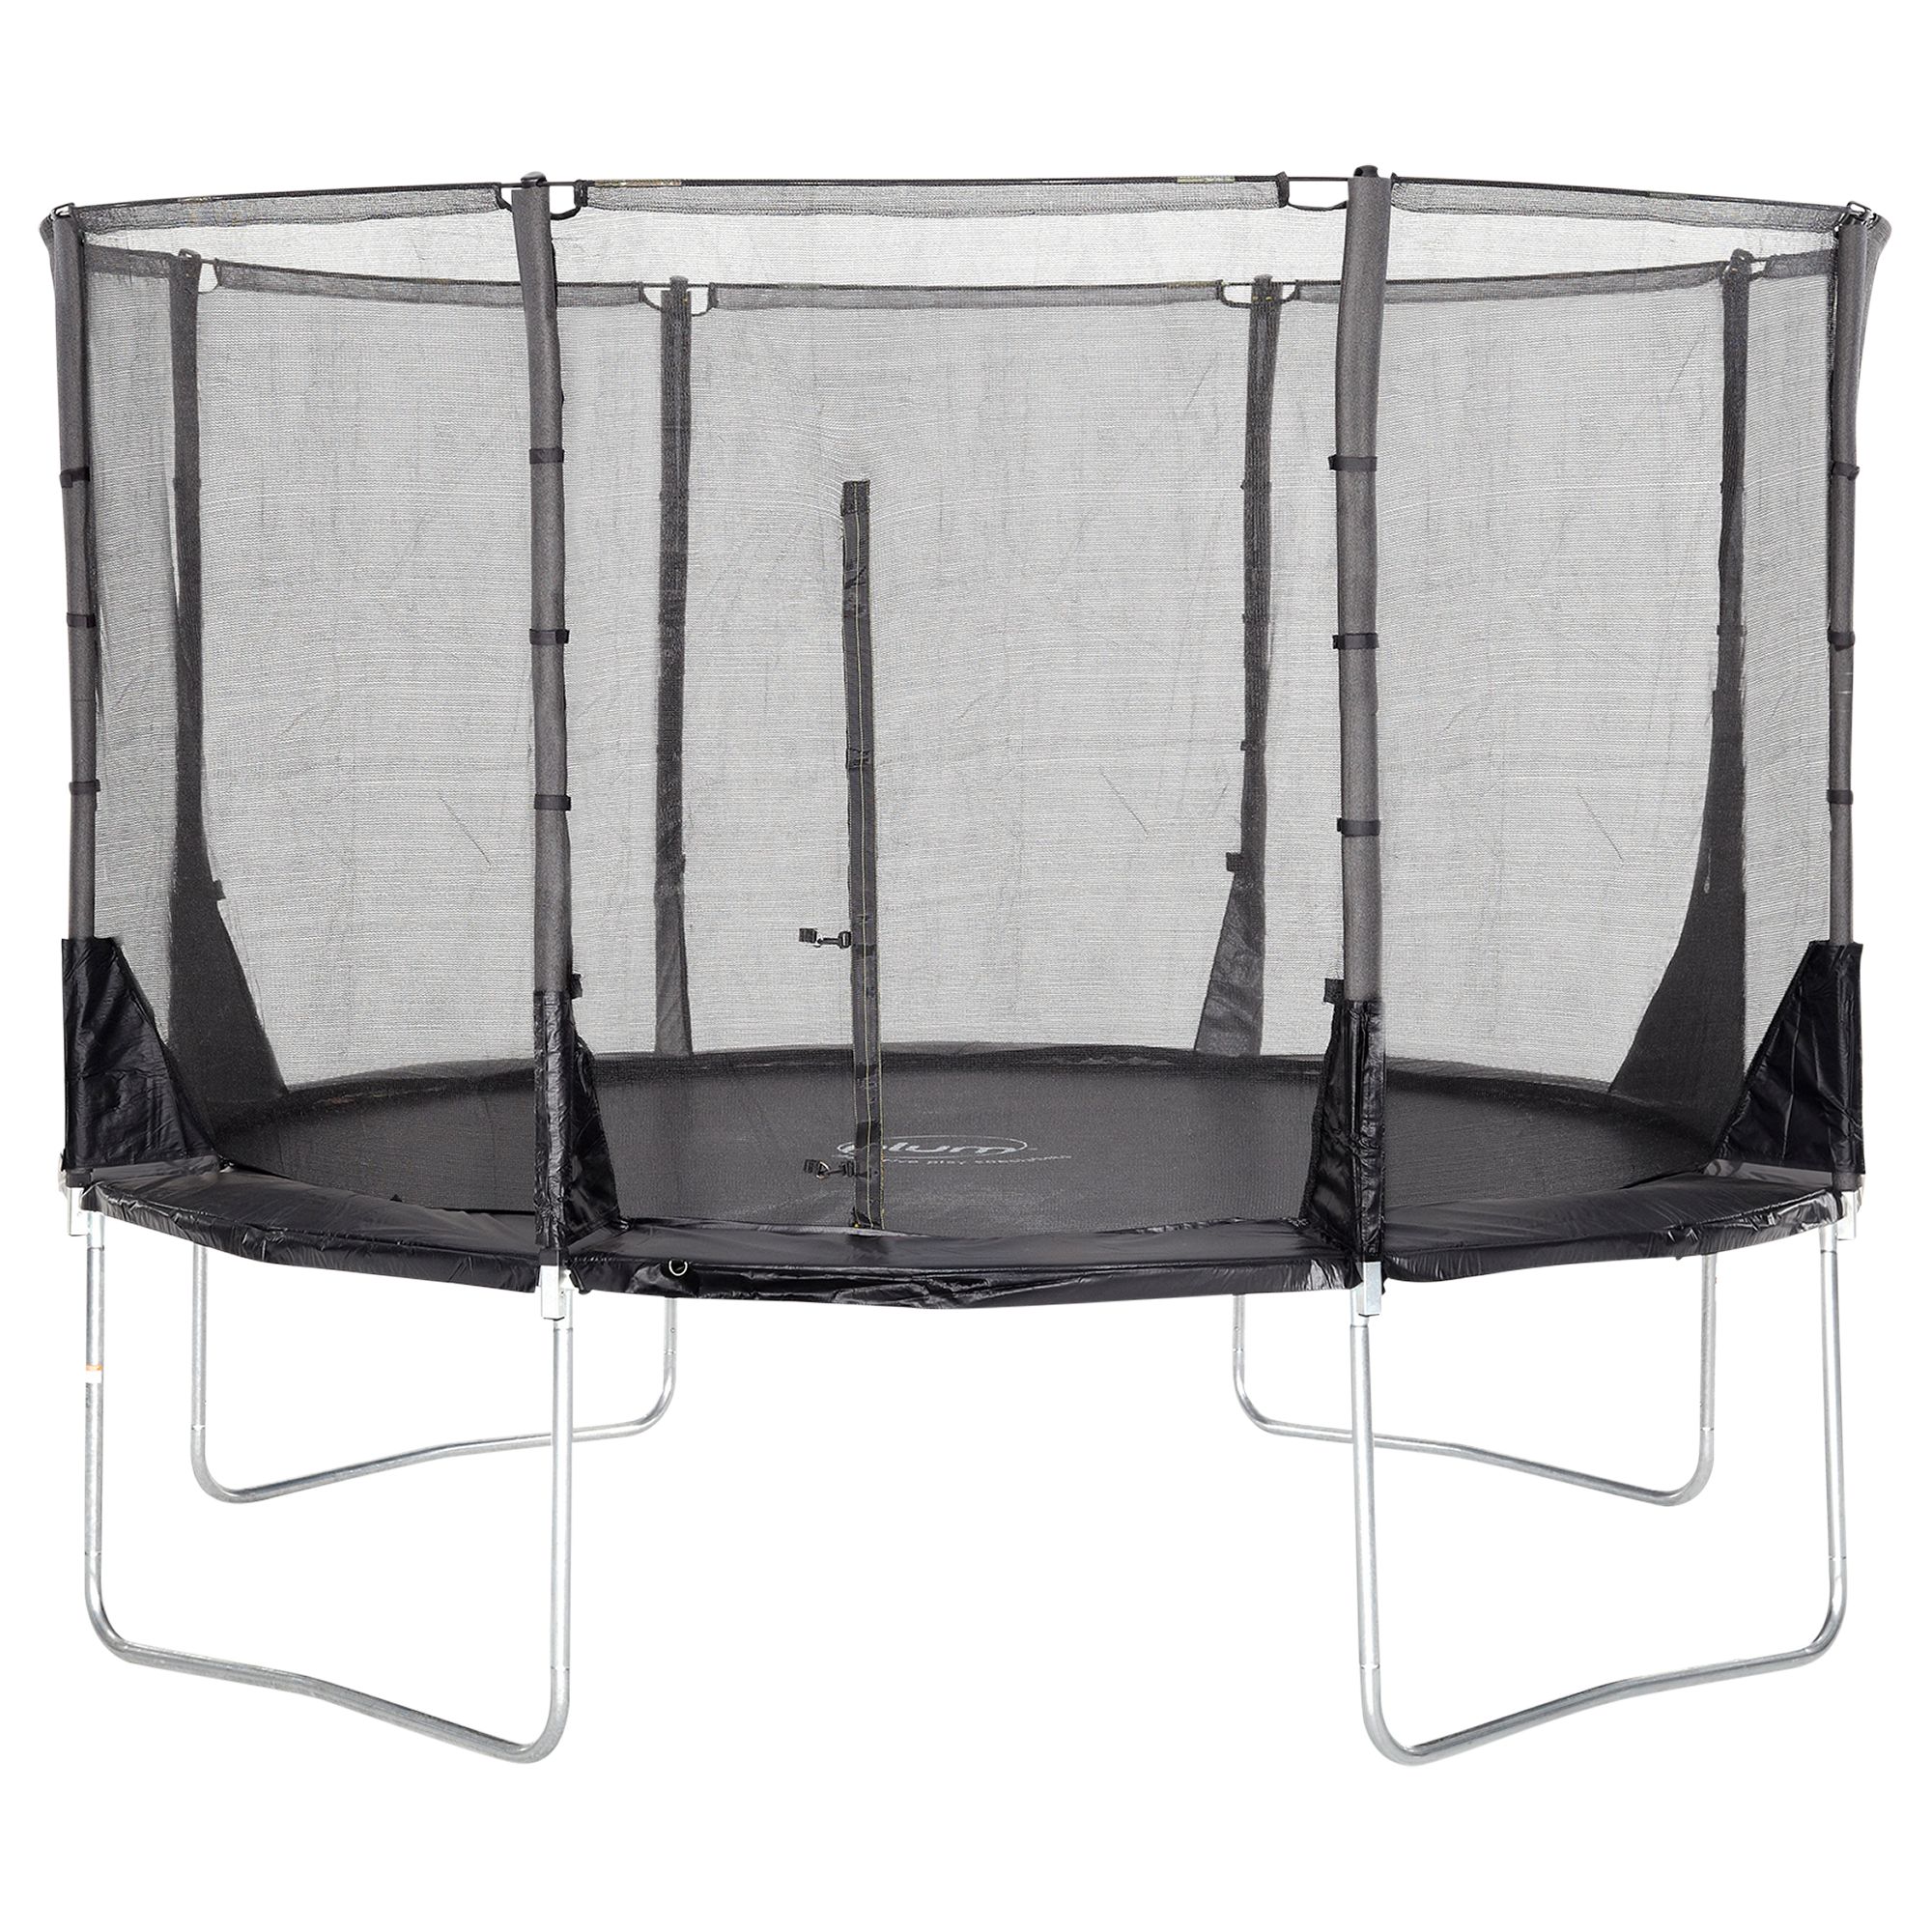 Plum Products Space Zone II Evolution Springsafe 14ft Trampoline & Cover